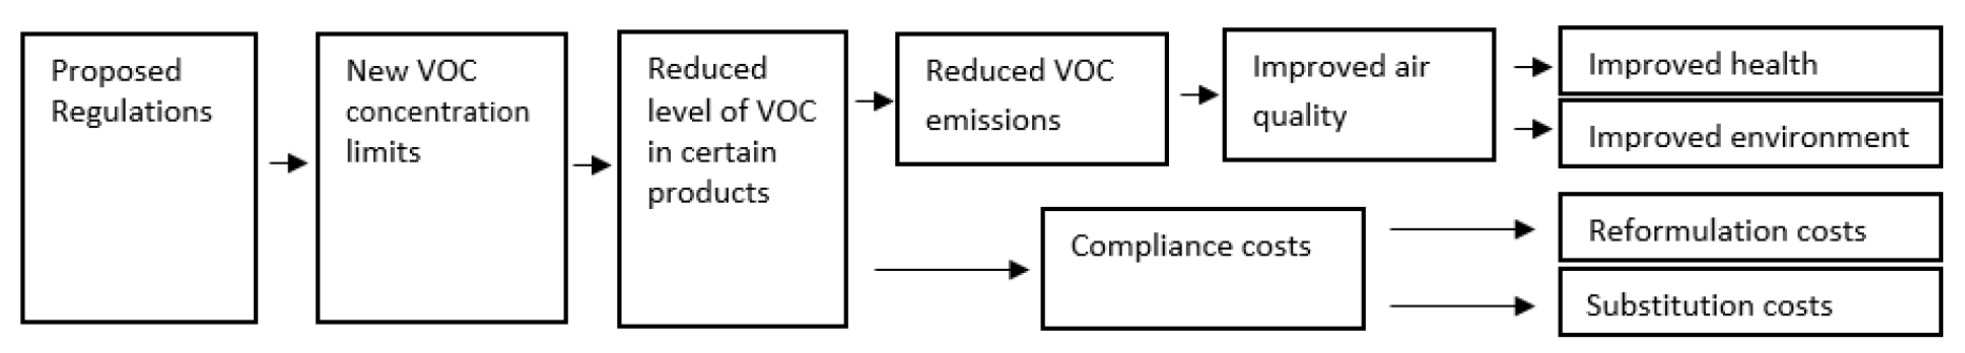 Logic model for the analysis of the proposed Regulations